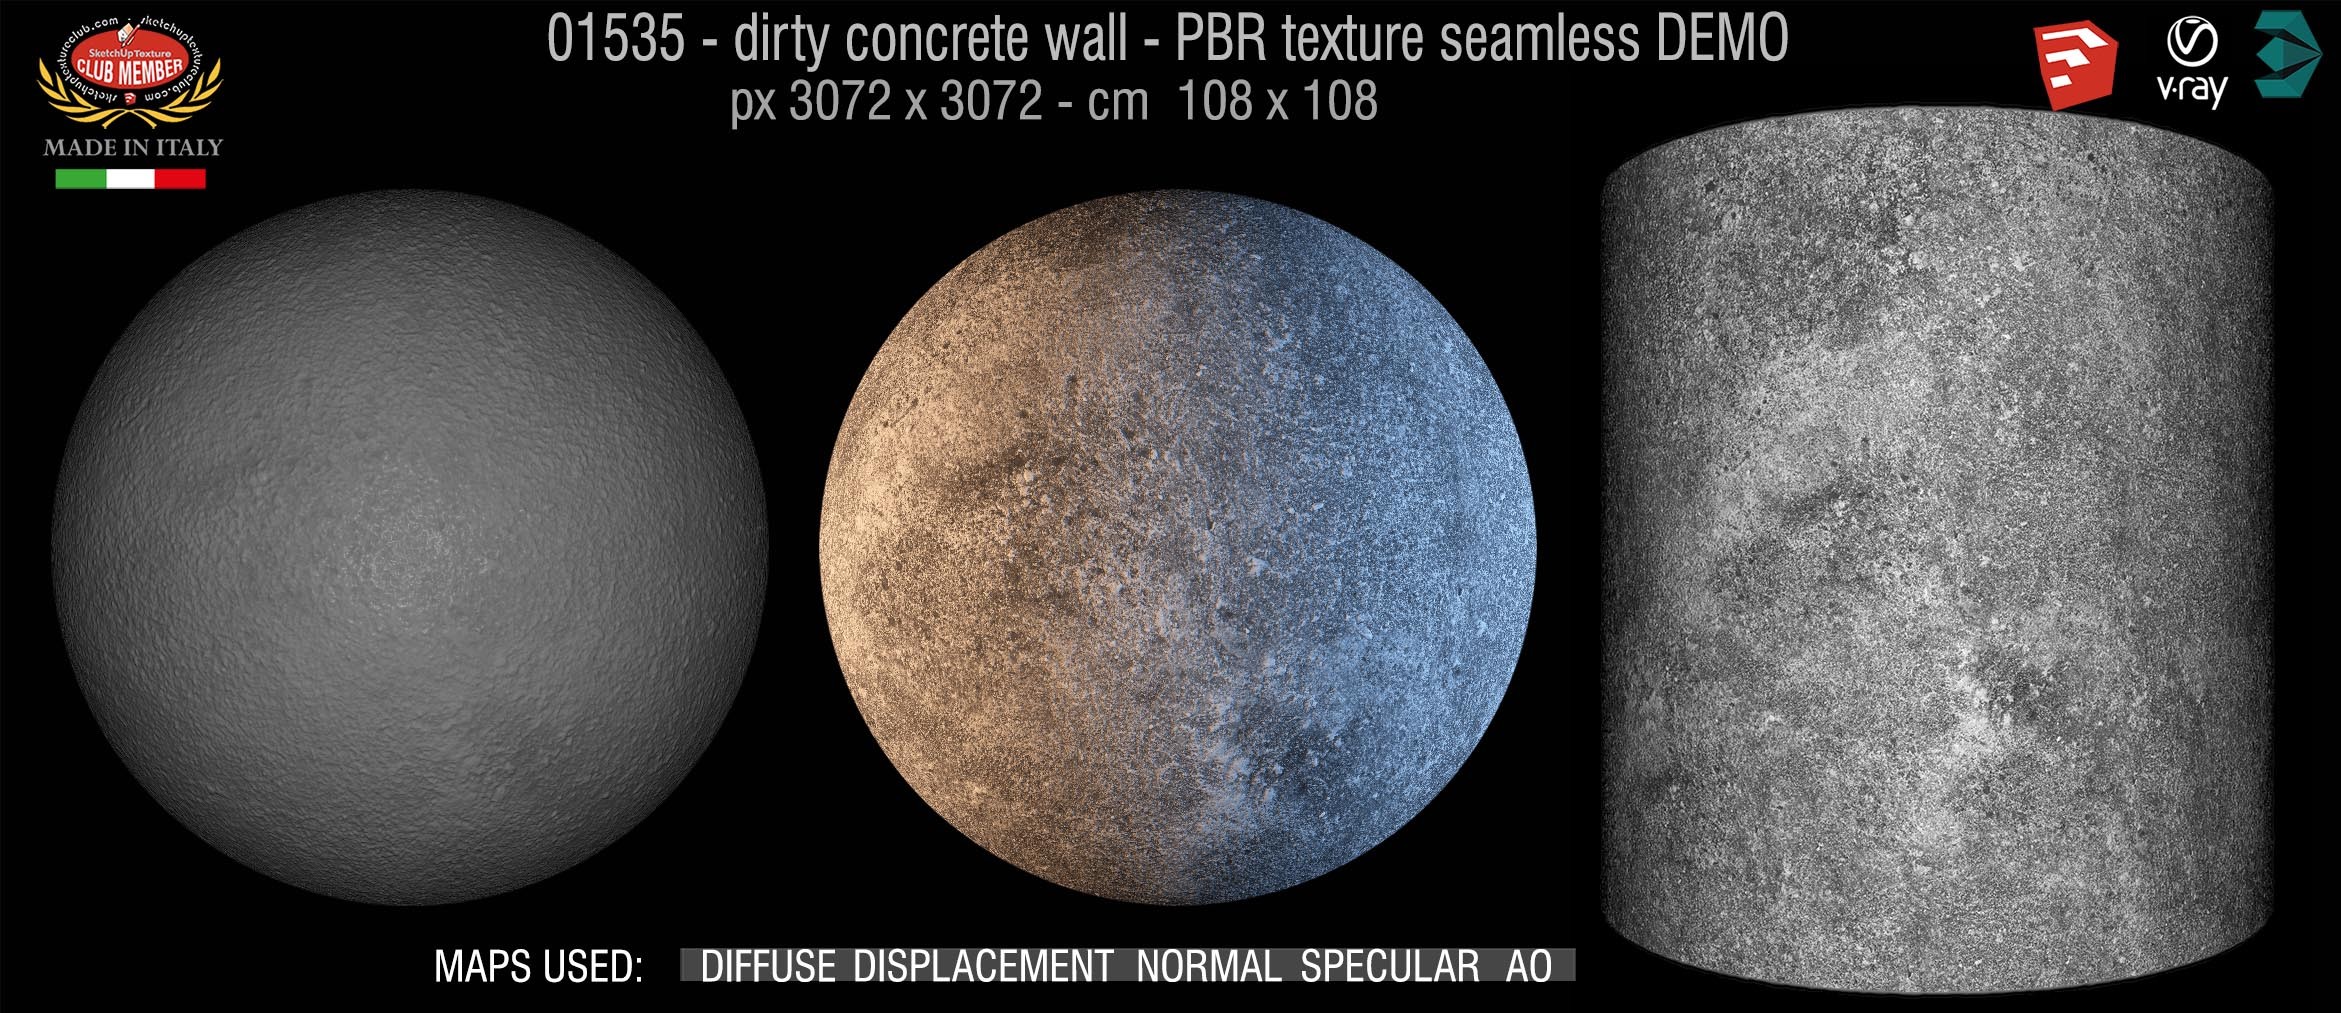 01535 dirty concrete wall PBR texture seamless DEMO